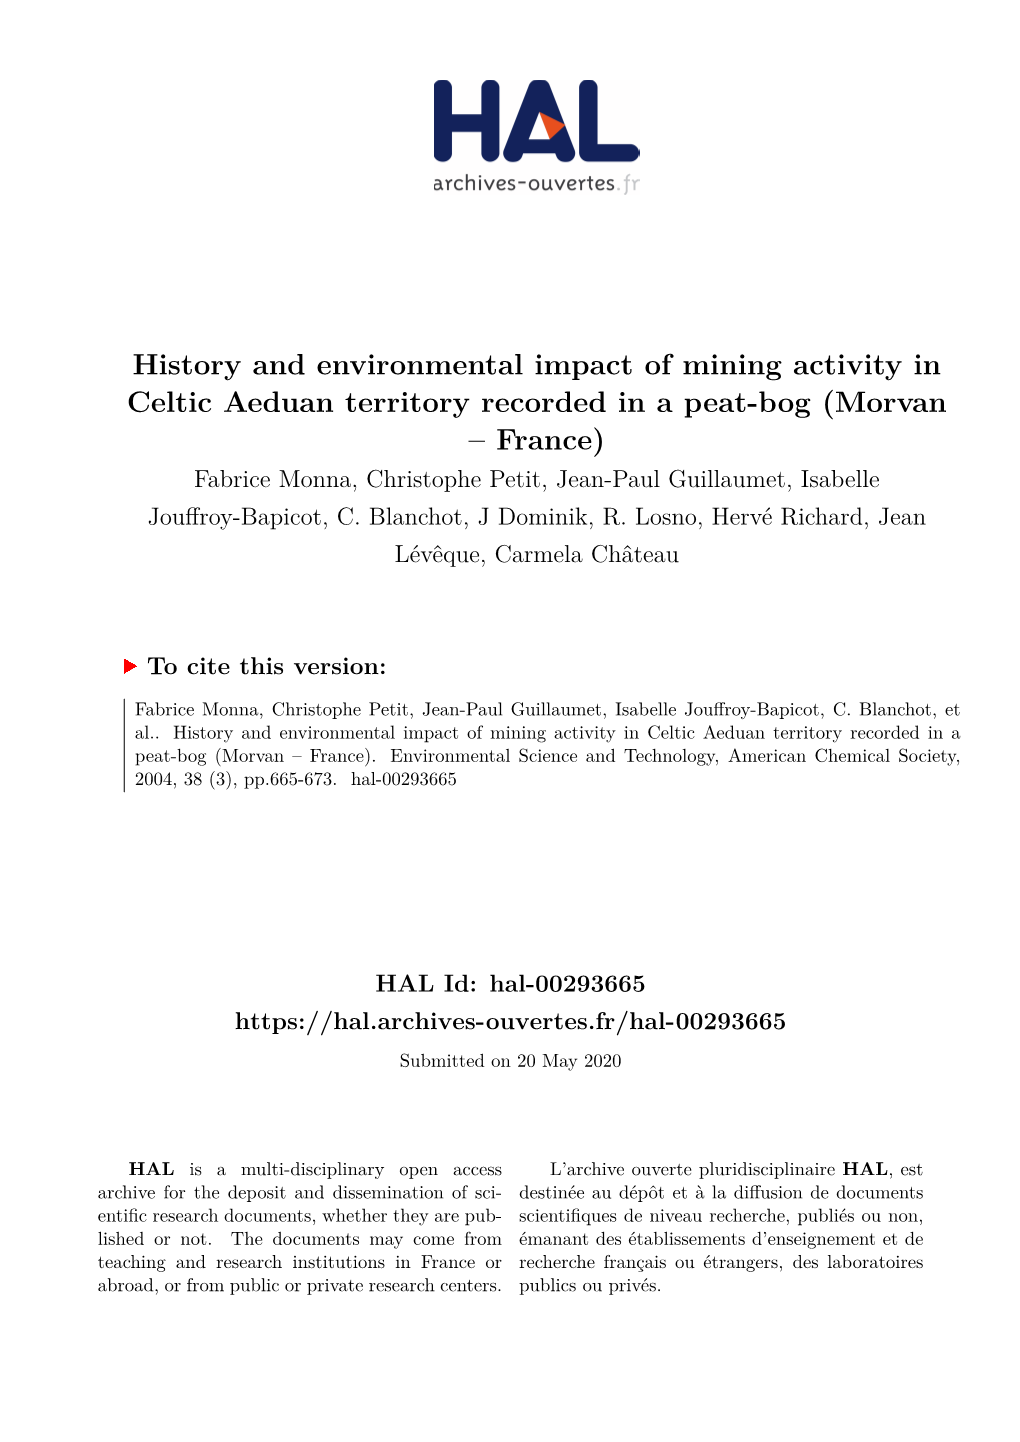 History and Environmental Impact of Mining Activity in Celtic Aeduan